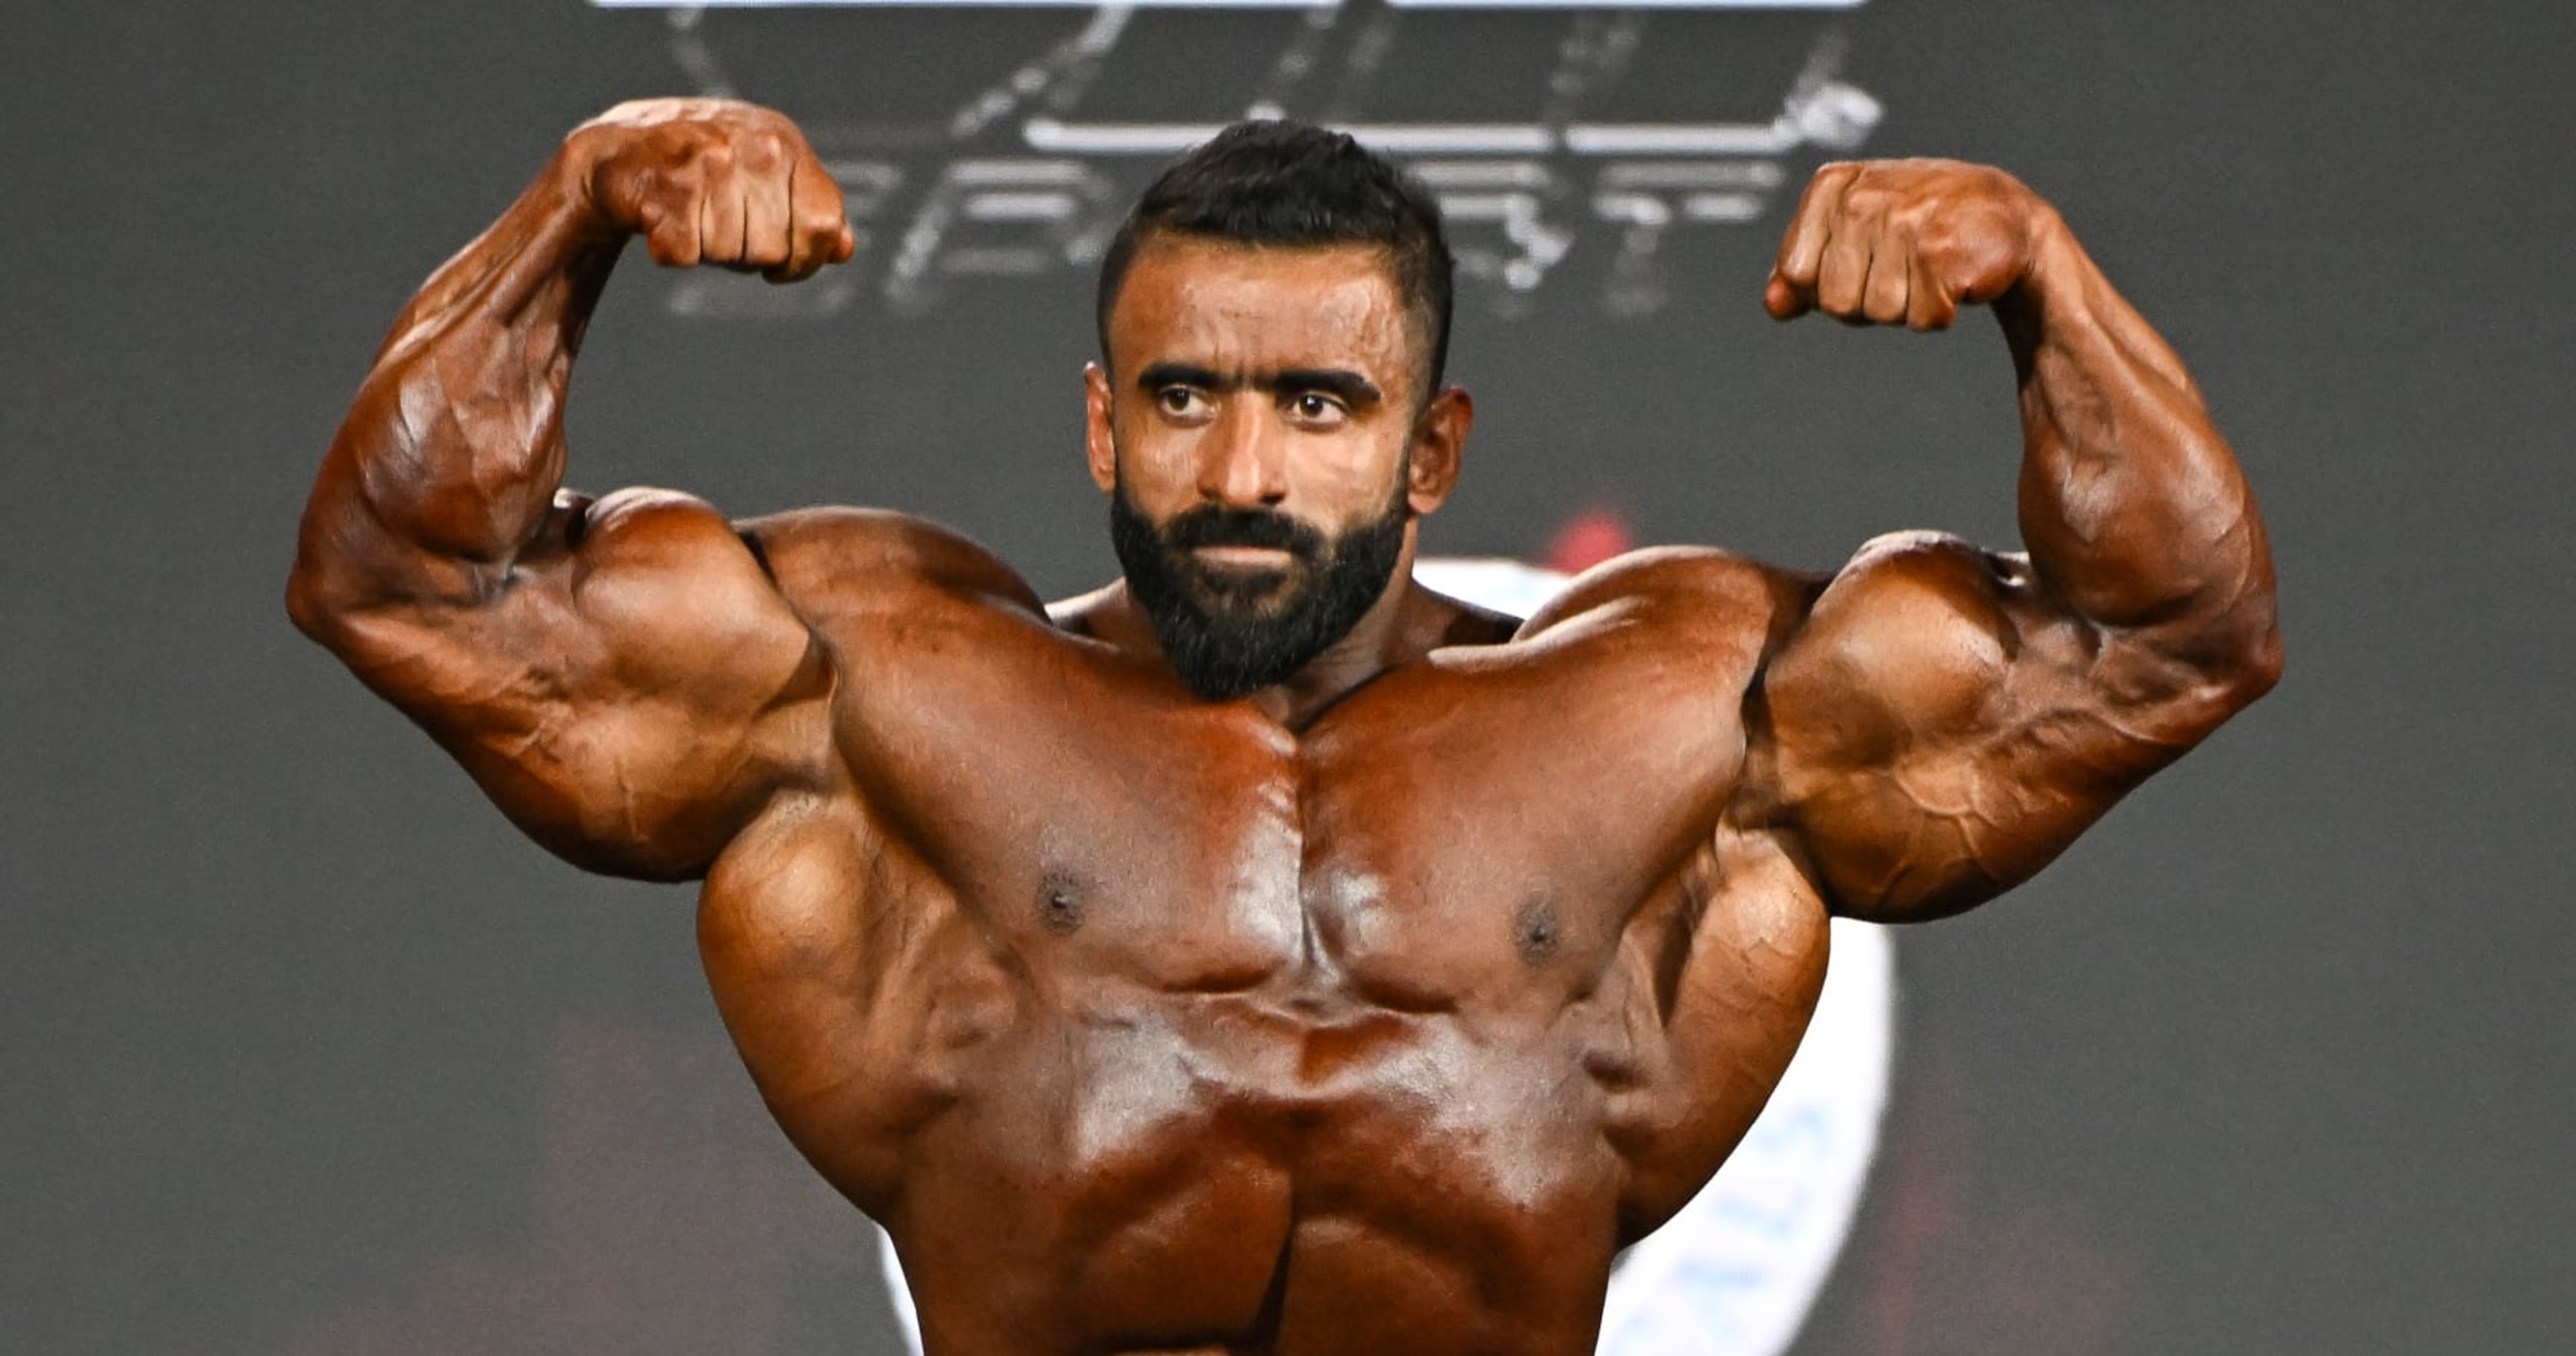 Mr. Olympia 2023 Results: Final Info for Hadi Choopan, Derek Lunsford, More, News, Scores, Highlights, Stats, and Rumors